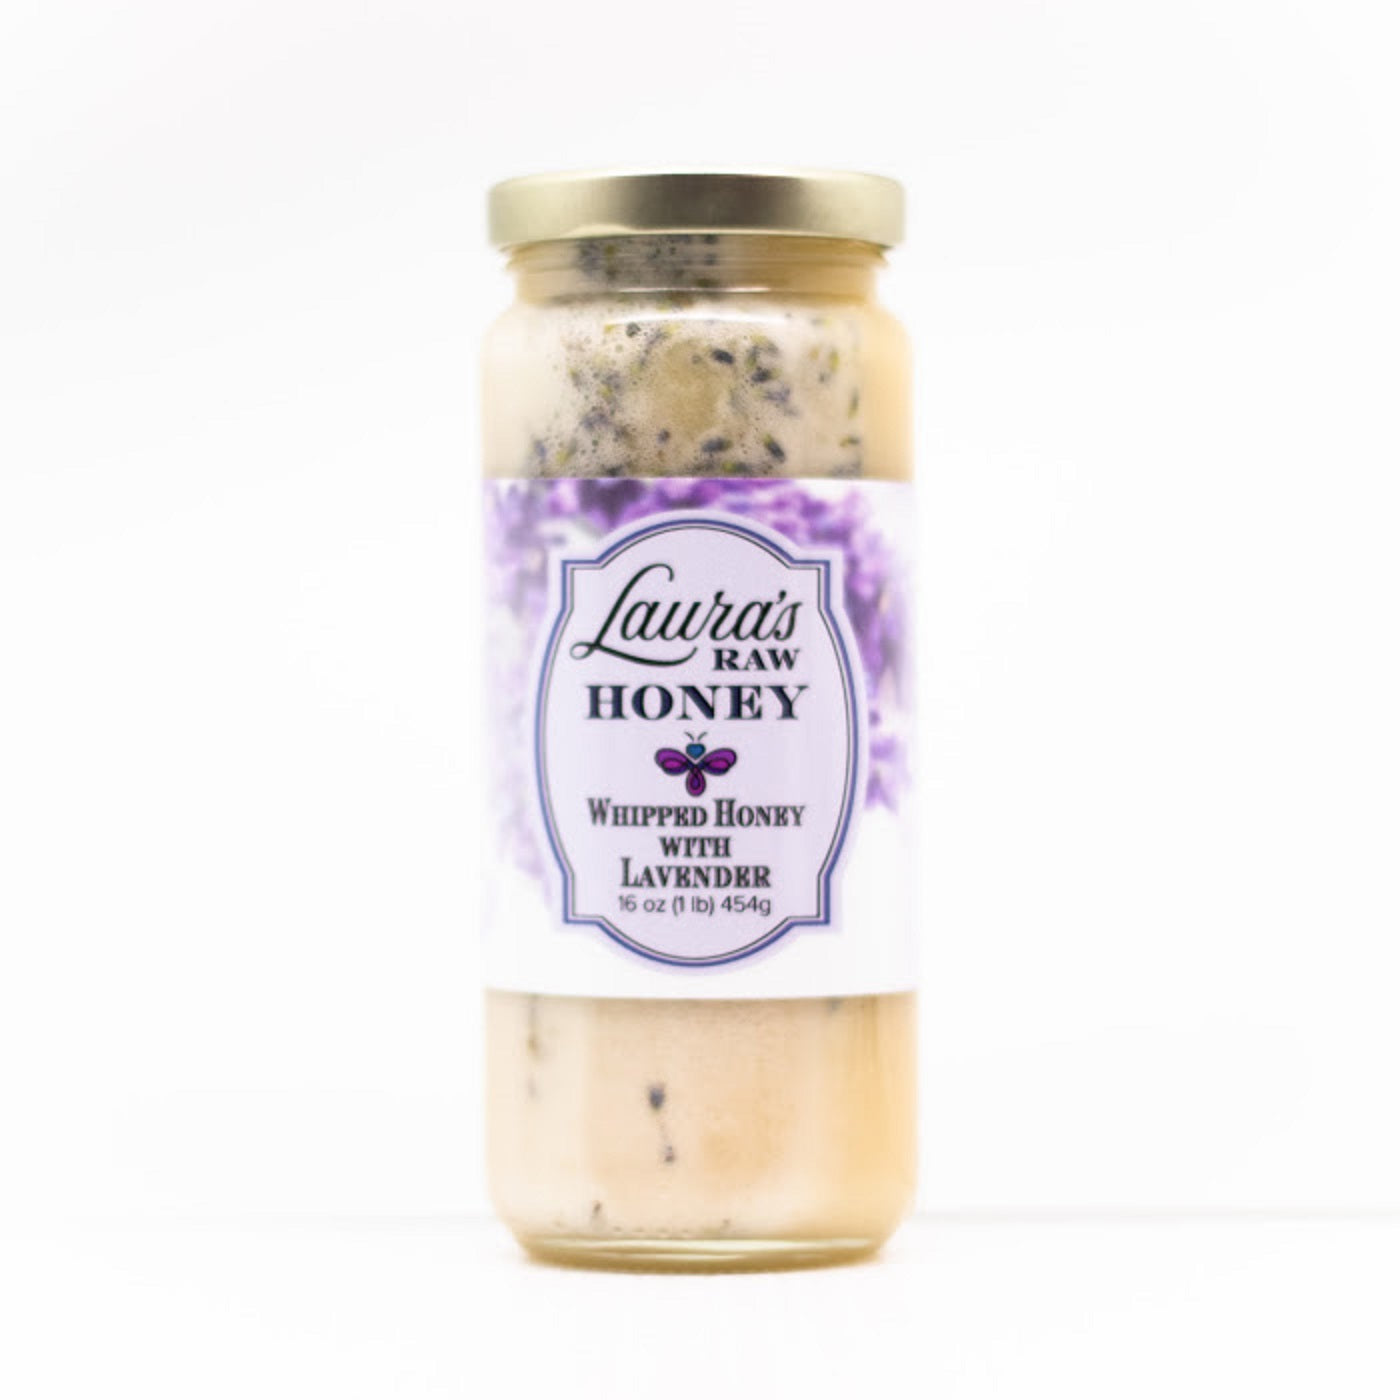 Whipped Honey with Lavender